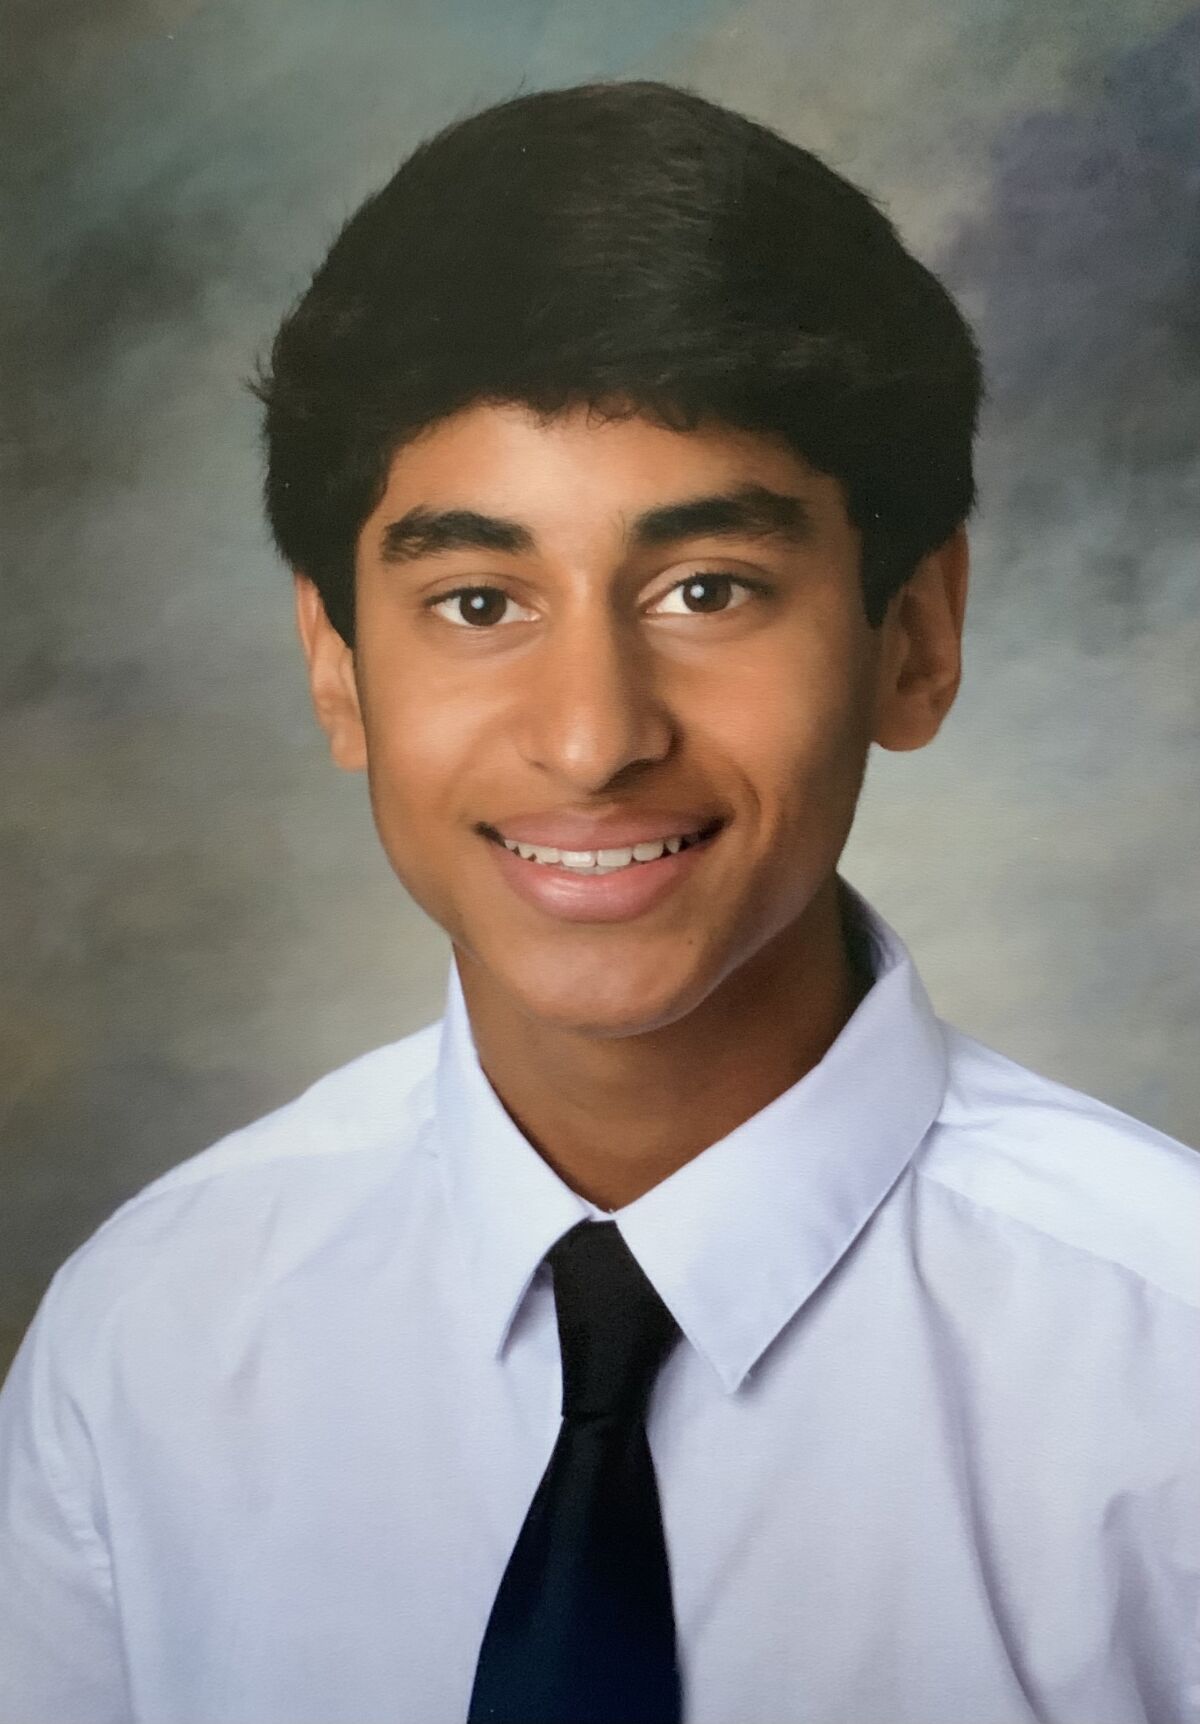 La Jolla Country Day School sophomore Akaash Doshi received honorable mention in the design competition.